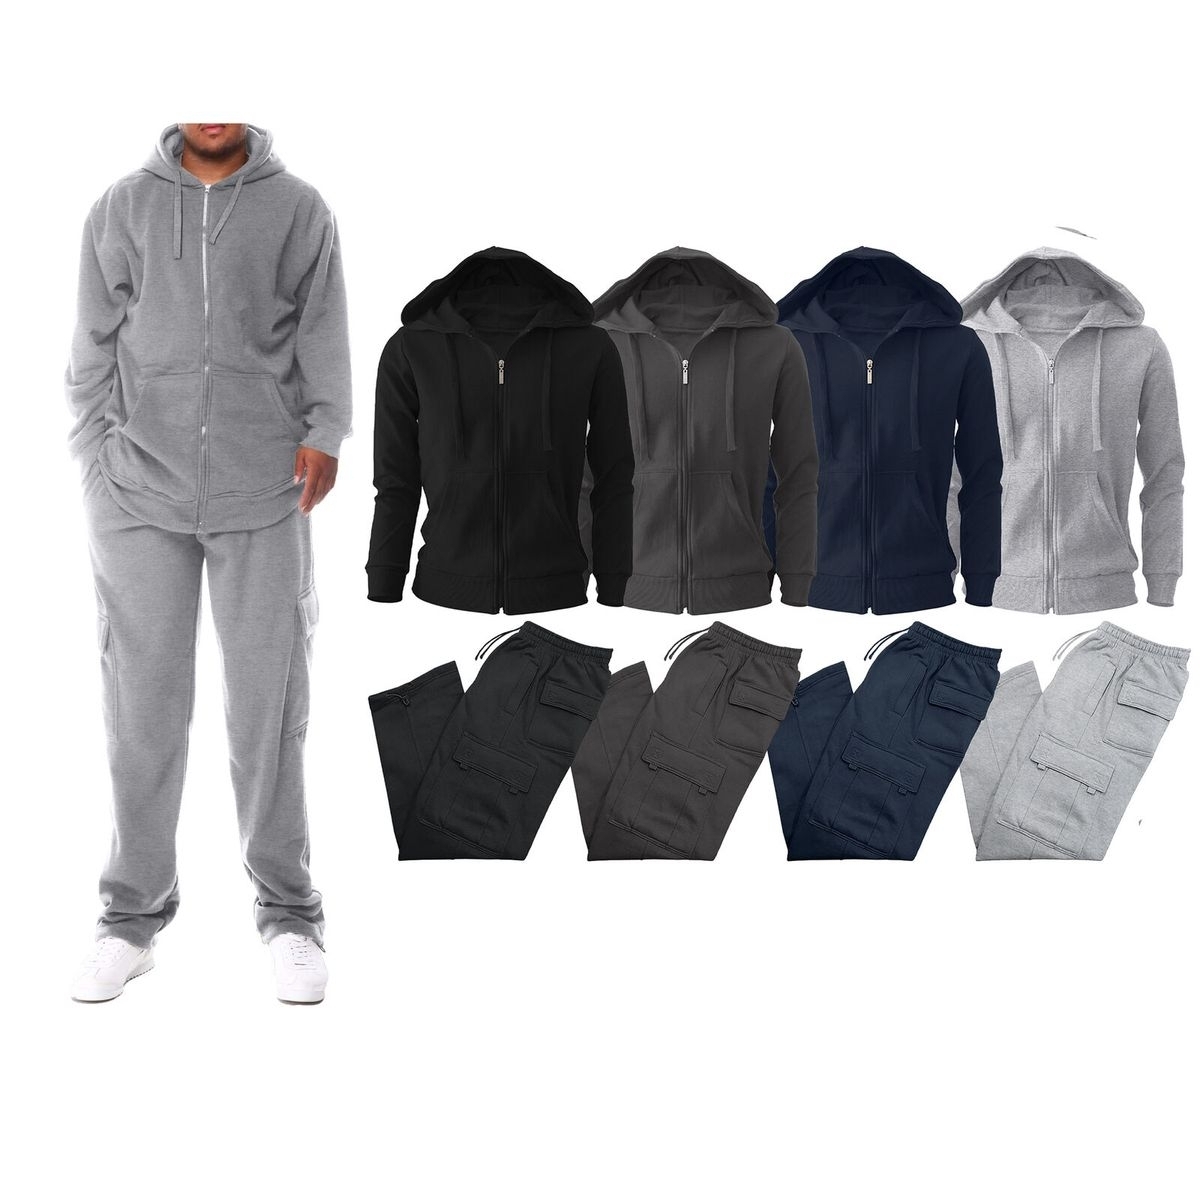 Men's Big & Tall Winter Warm Athletic Active Cozy Fleece Lined Multi-Pocket Full Zip Up Cargo Tracksuit - Grey, X-large